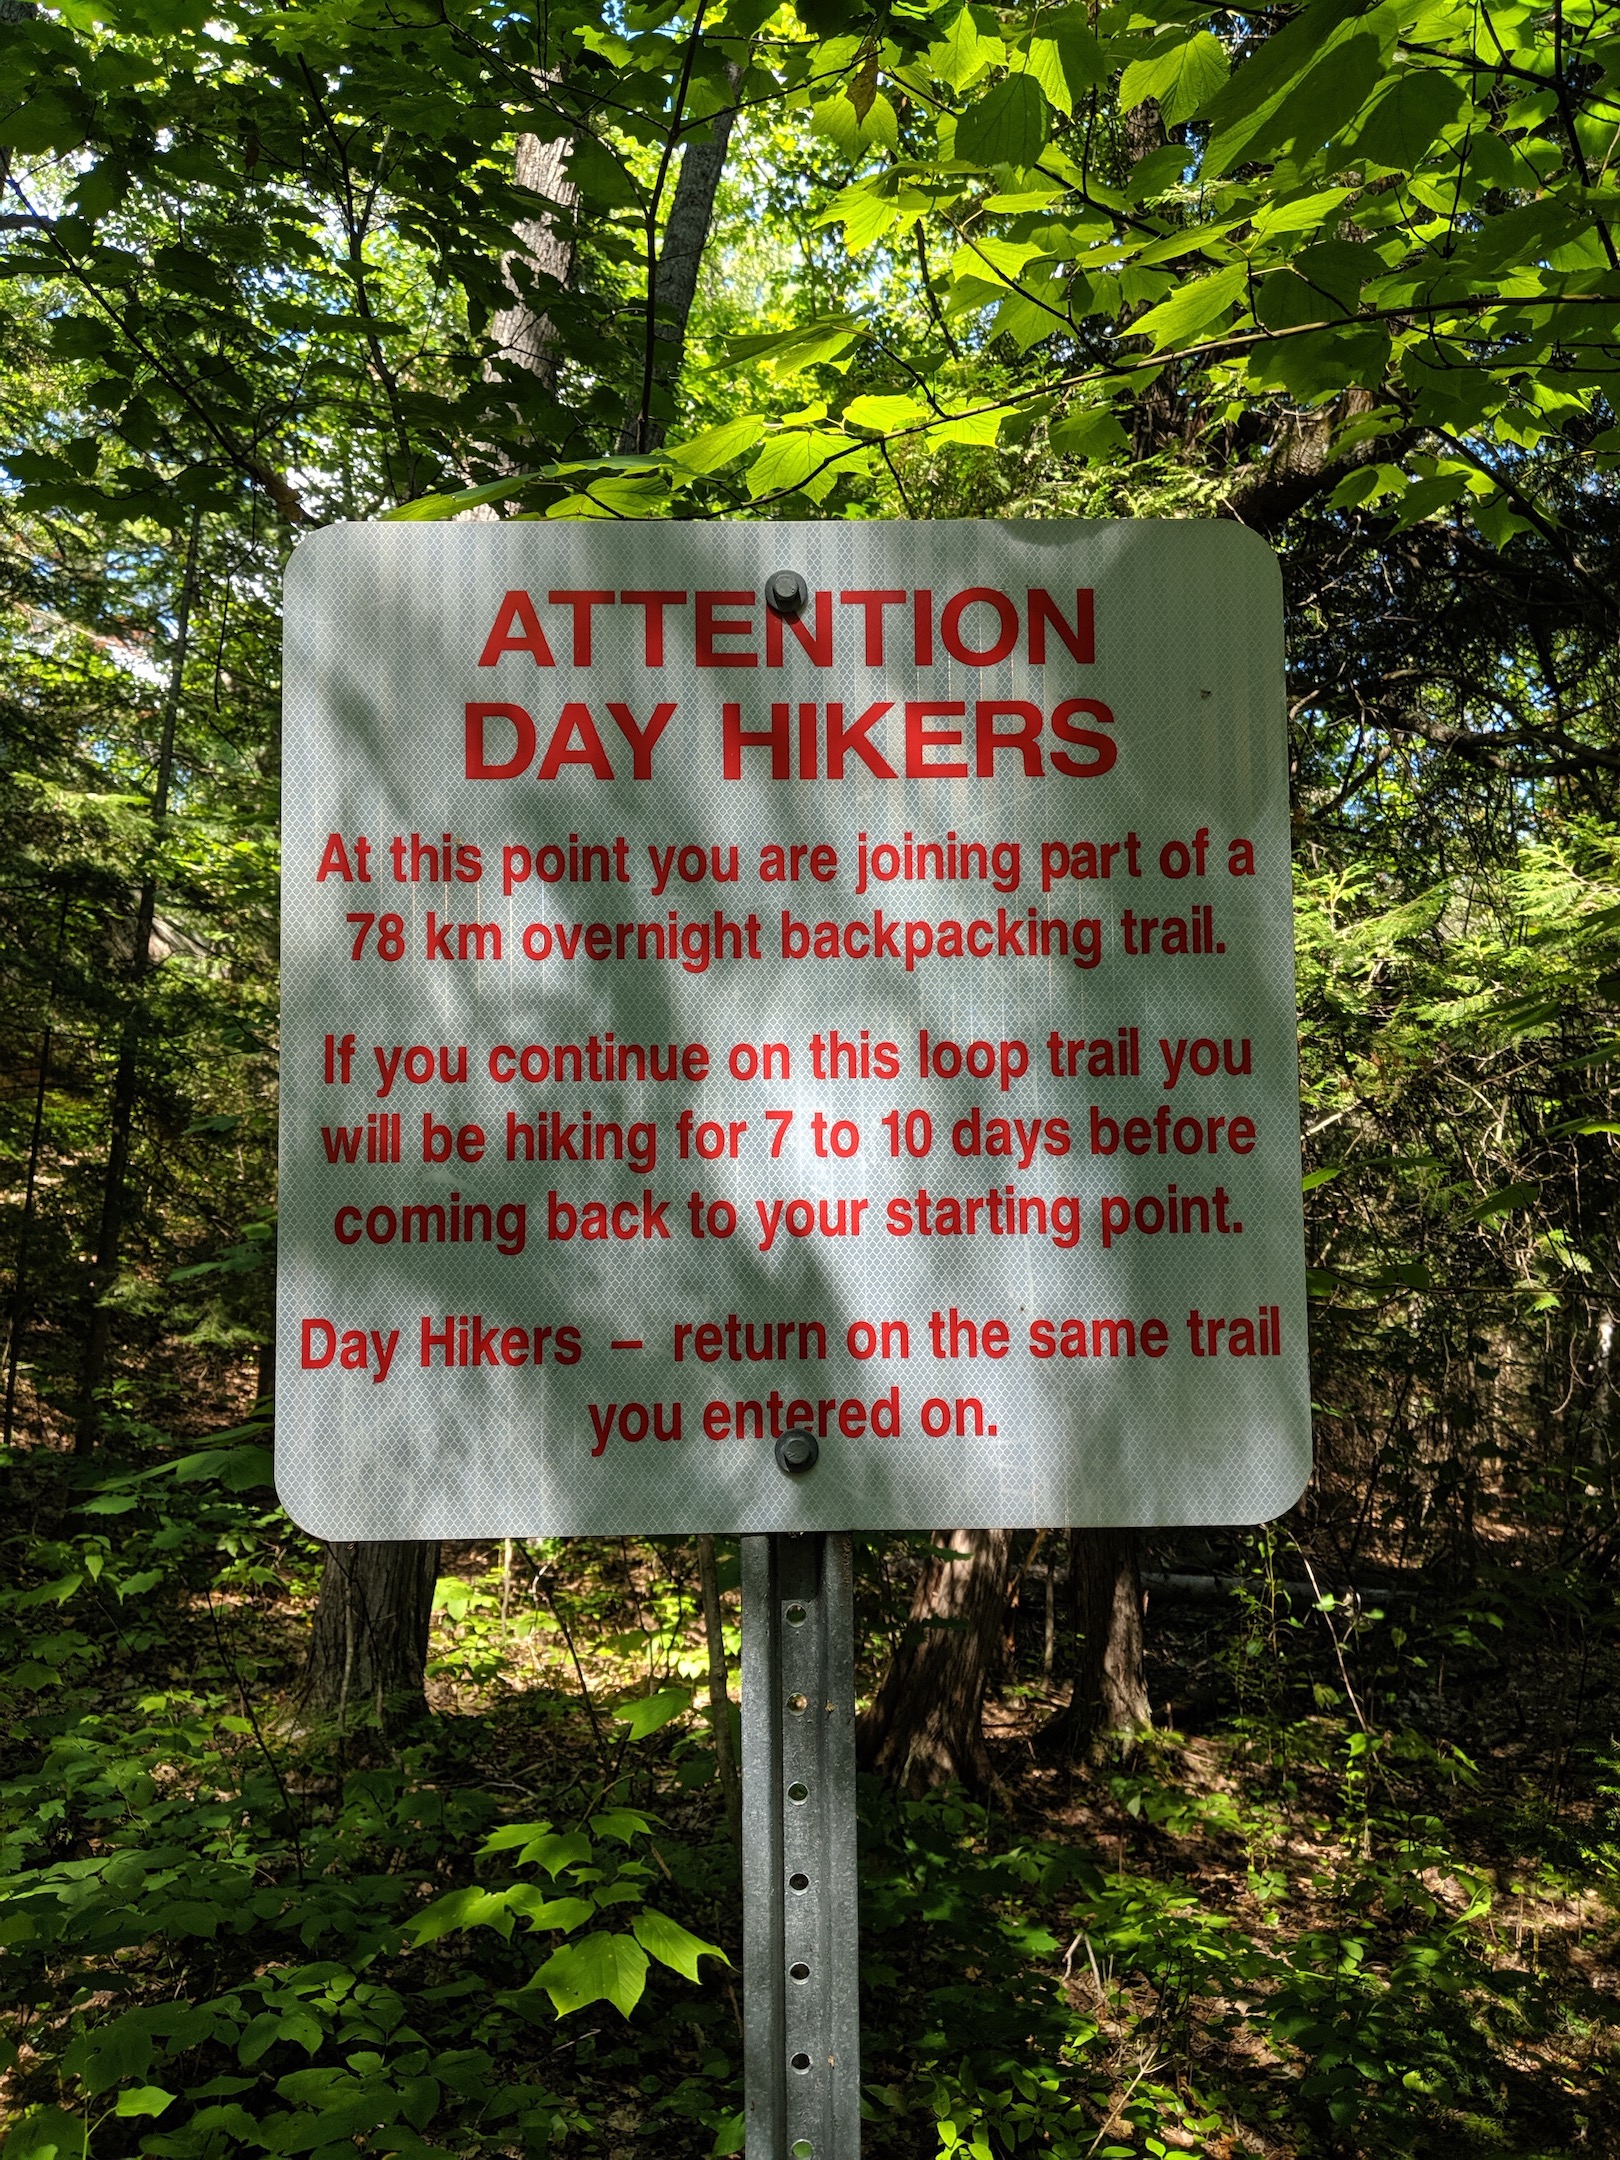 Sign in the woods that reads: "ATTENTION DAY HIKERS: At this point you are joining part of a 78 km overnight backpacking trail. If you continue on this loop trail you will be hiking for 7 to 10 days before coming back to your starting point. Day Hikers -- return on the same trail you entered on." (NB. According to family who work for Ontario Parks, every few years, someone disregards this sign and park staff have to go rescue them.)